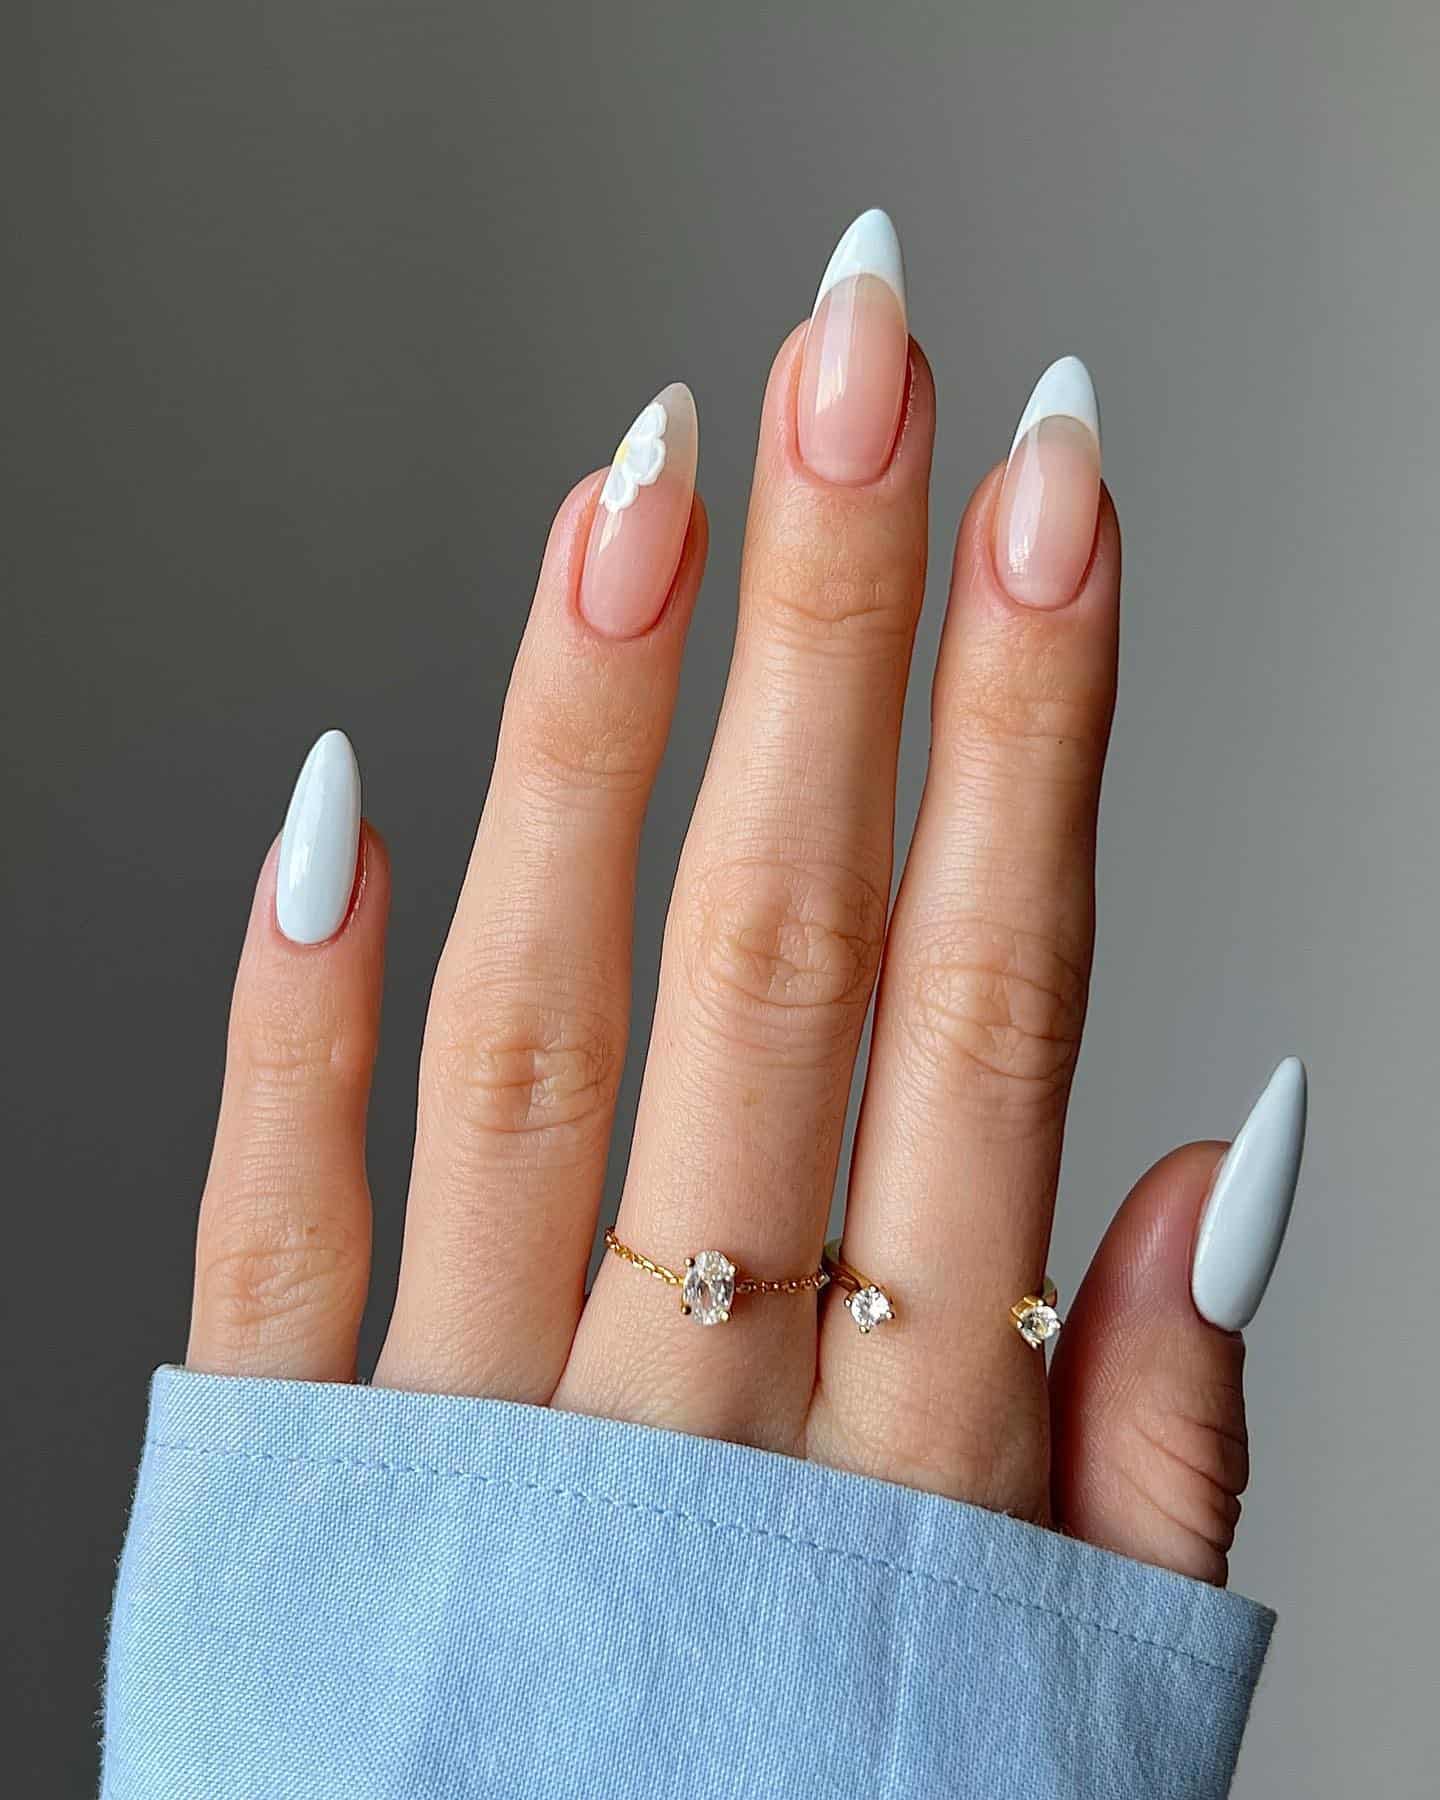 A hand with medium almond nails painted in classic French tips with one accent nail featuring a small white flower along the side